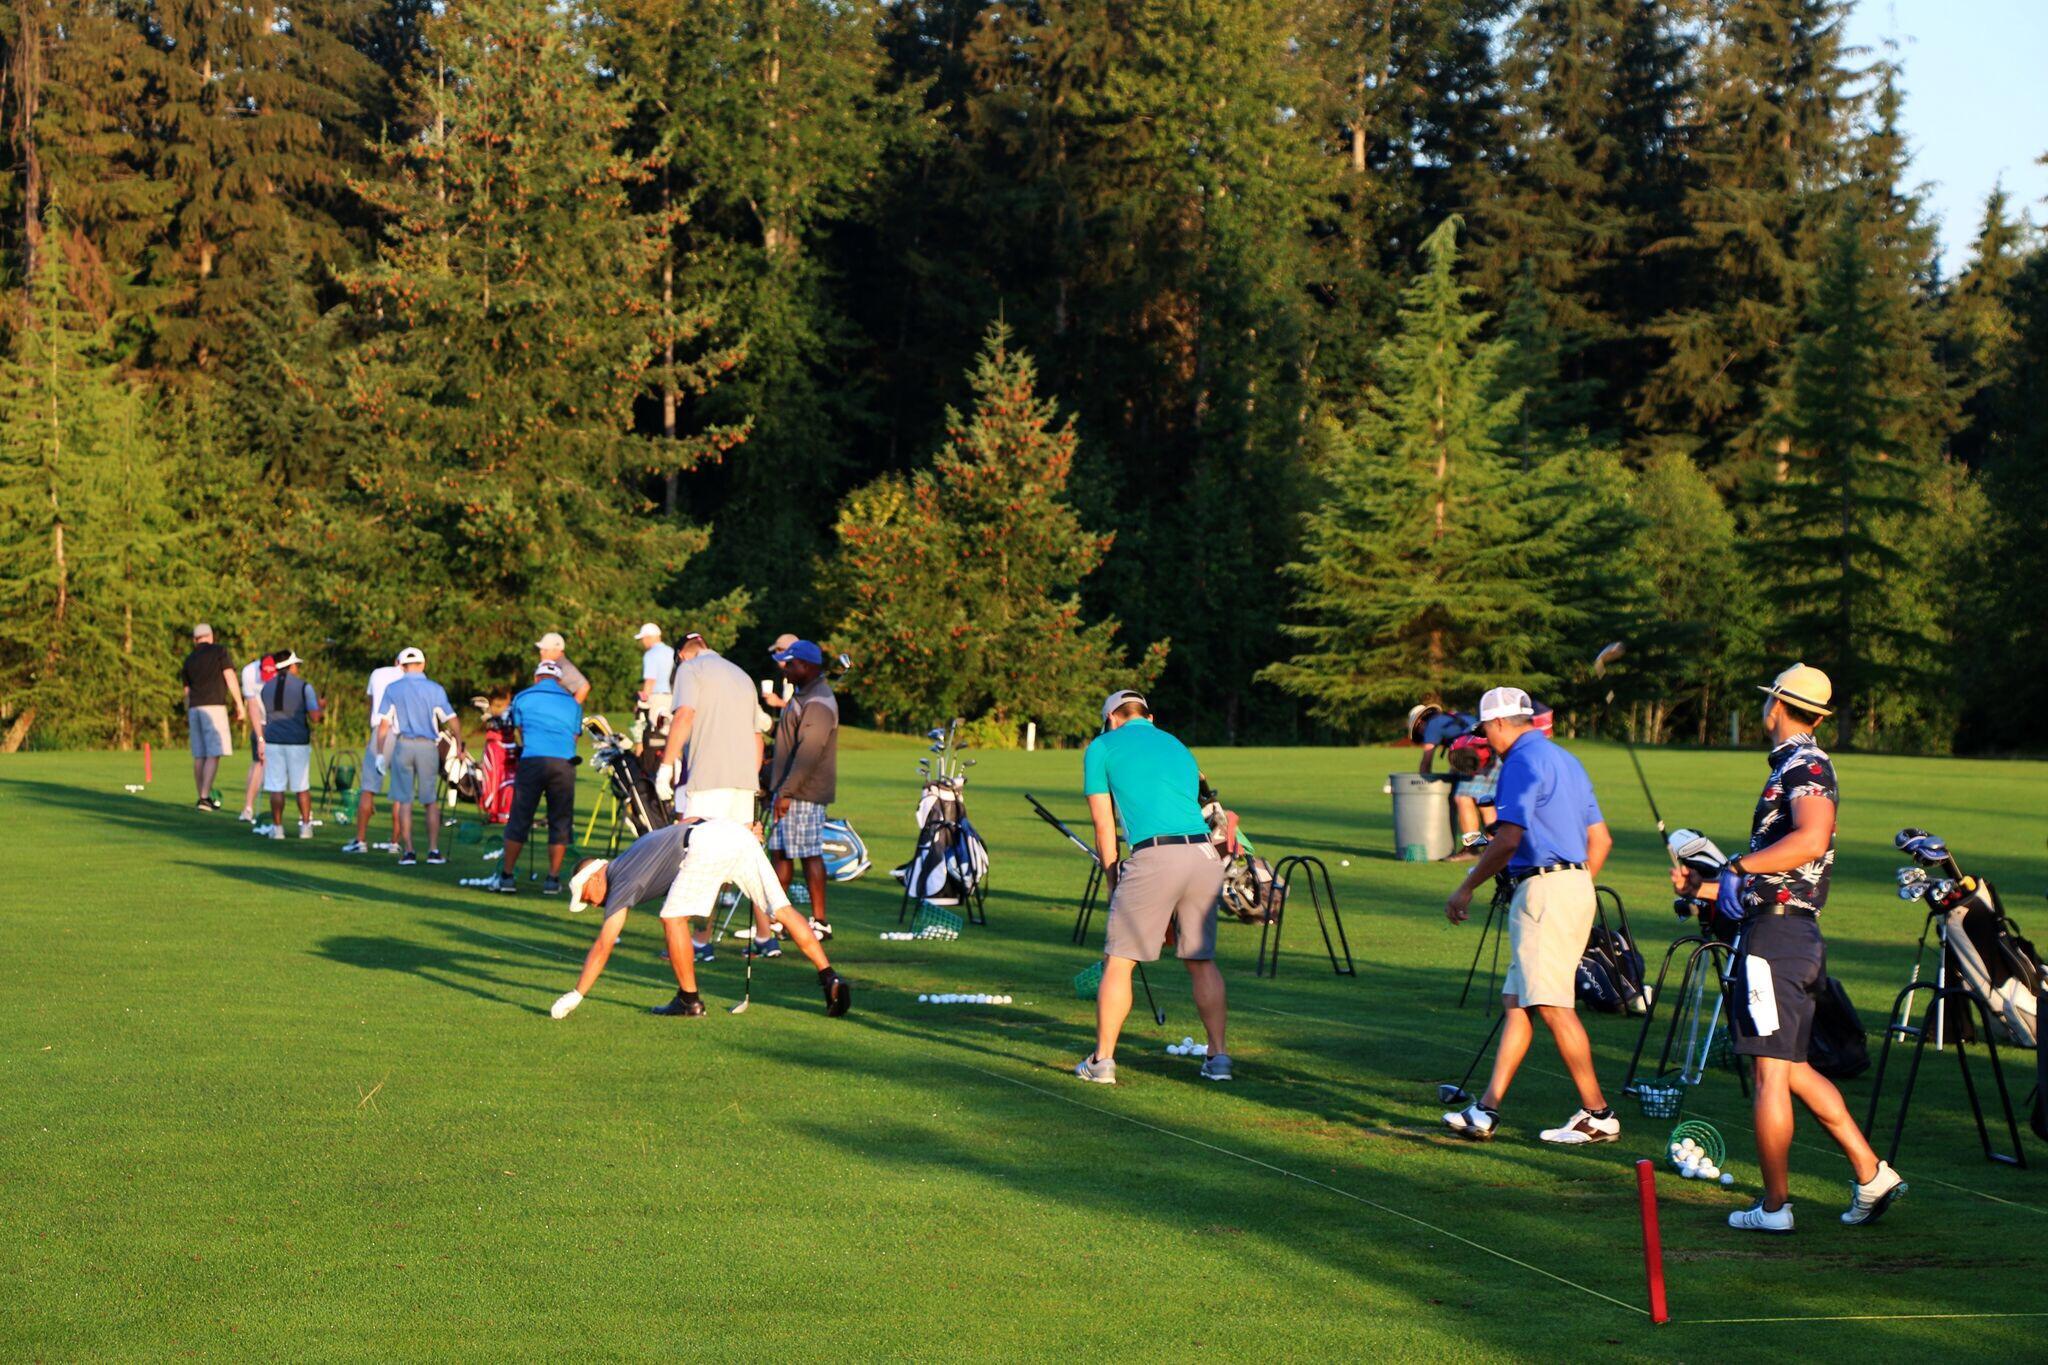 7th Annual Golf Fundraiser for the Filipino Chamber of Commerce of the Pacific Northwest!